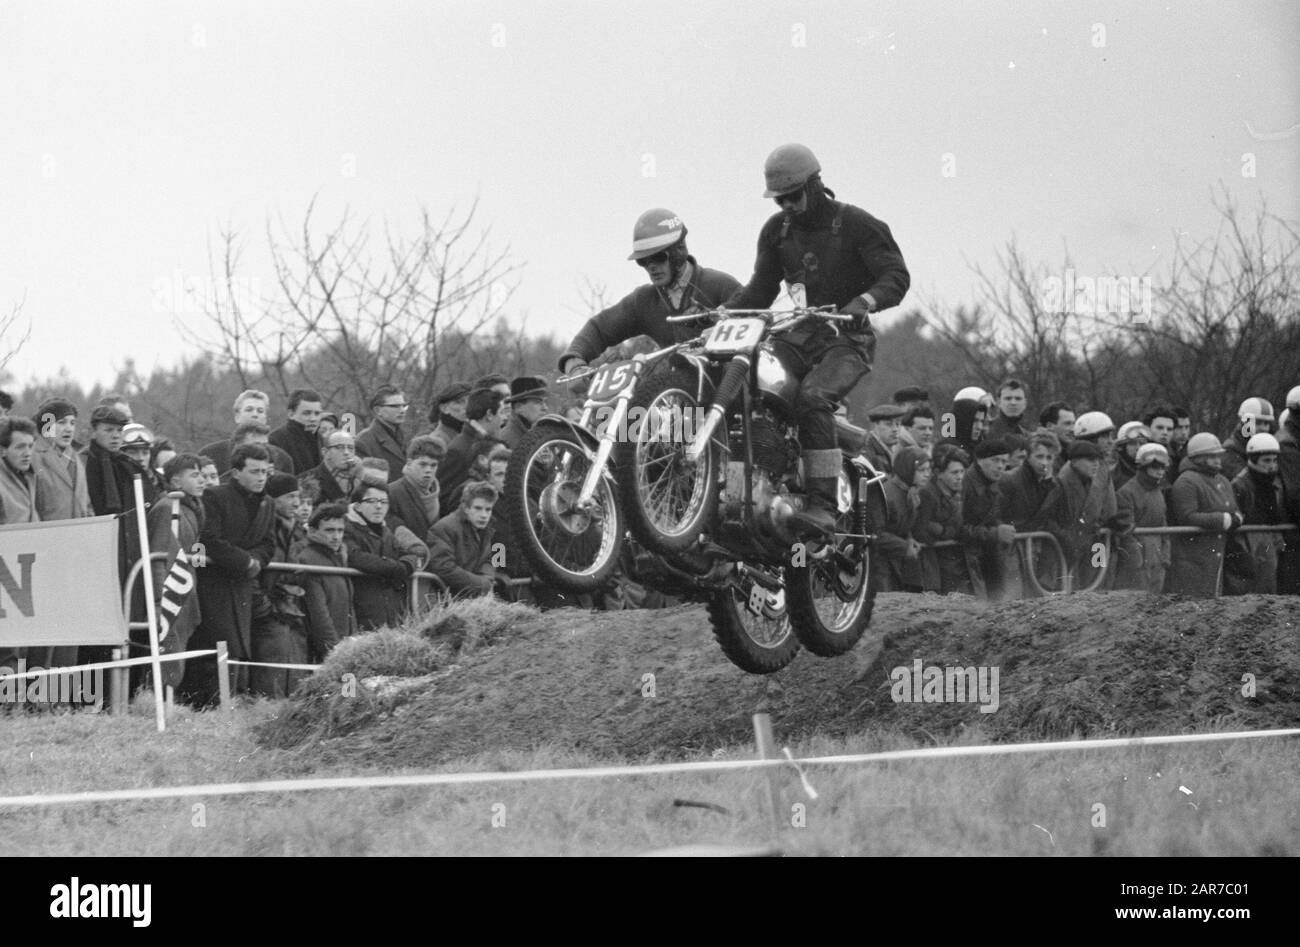 Opening Motorcross season and country match Netherlands against Belgium, Rob Selling (number 14), Van Ham (number 32) Date: February 25, 1962 Keywords: MOTOCROSS, openings Personal name: Selling, Rob Stock Photo